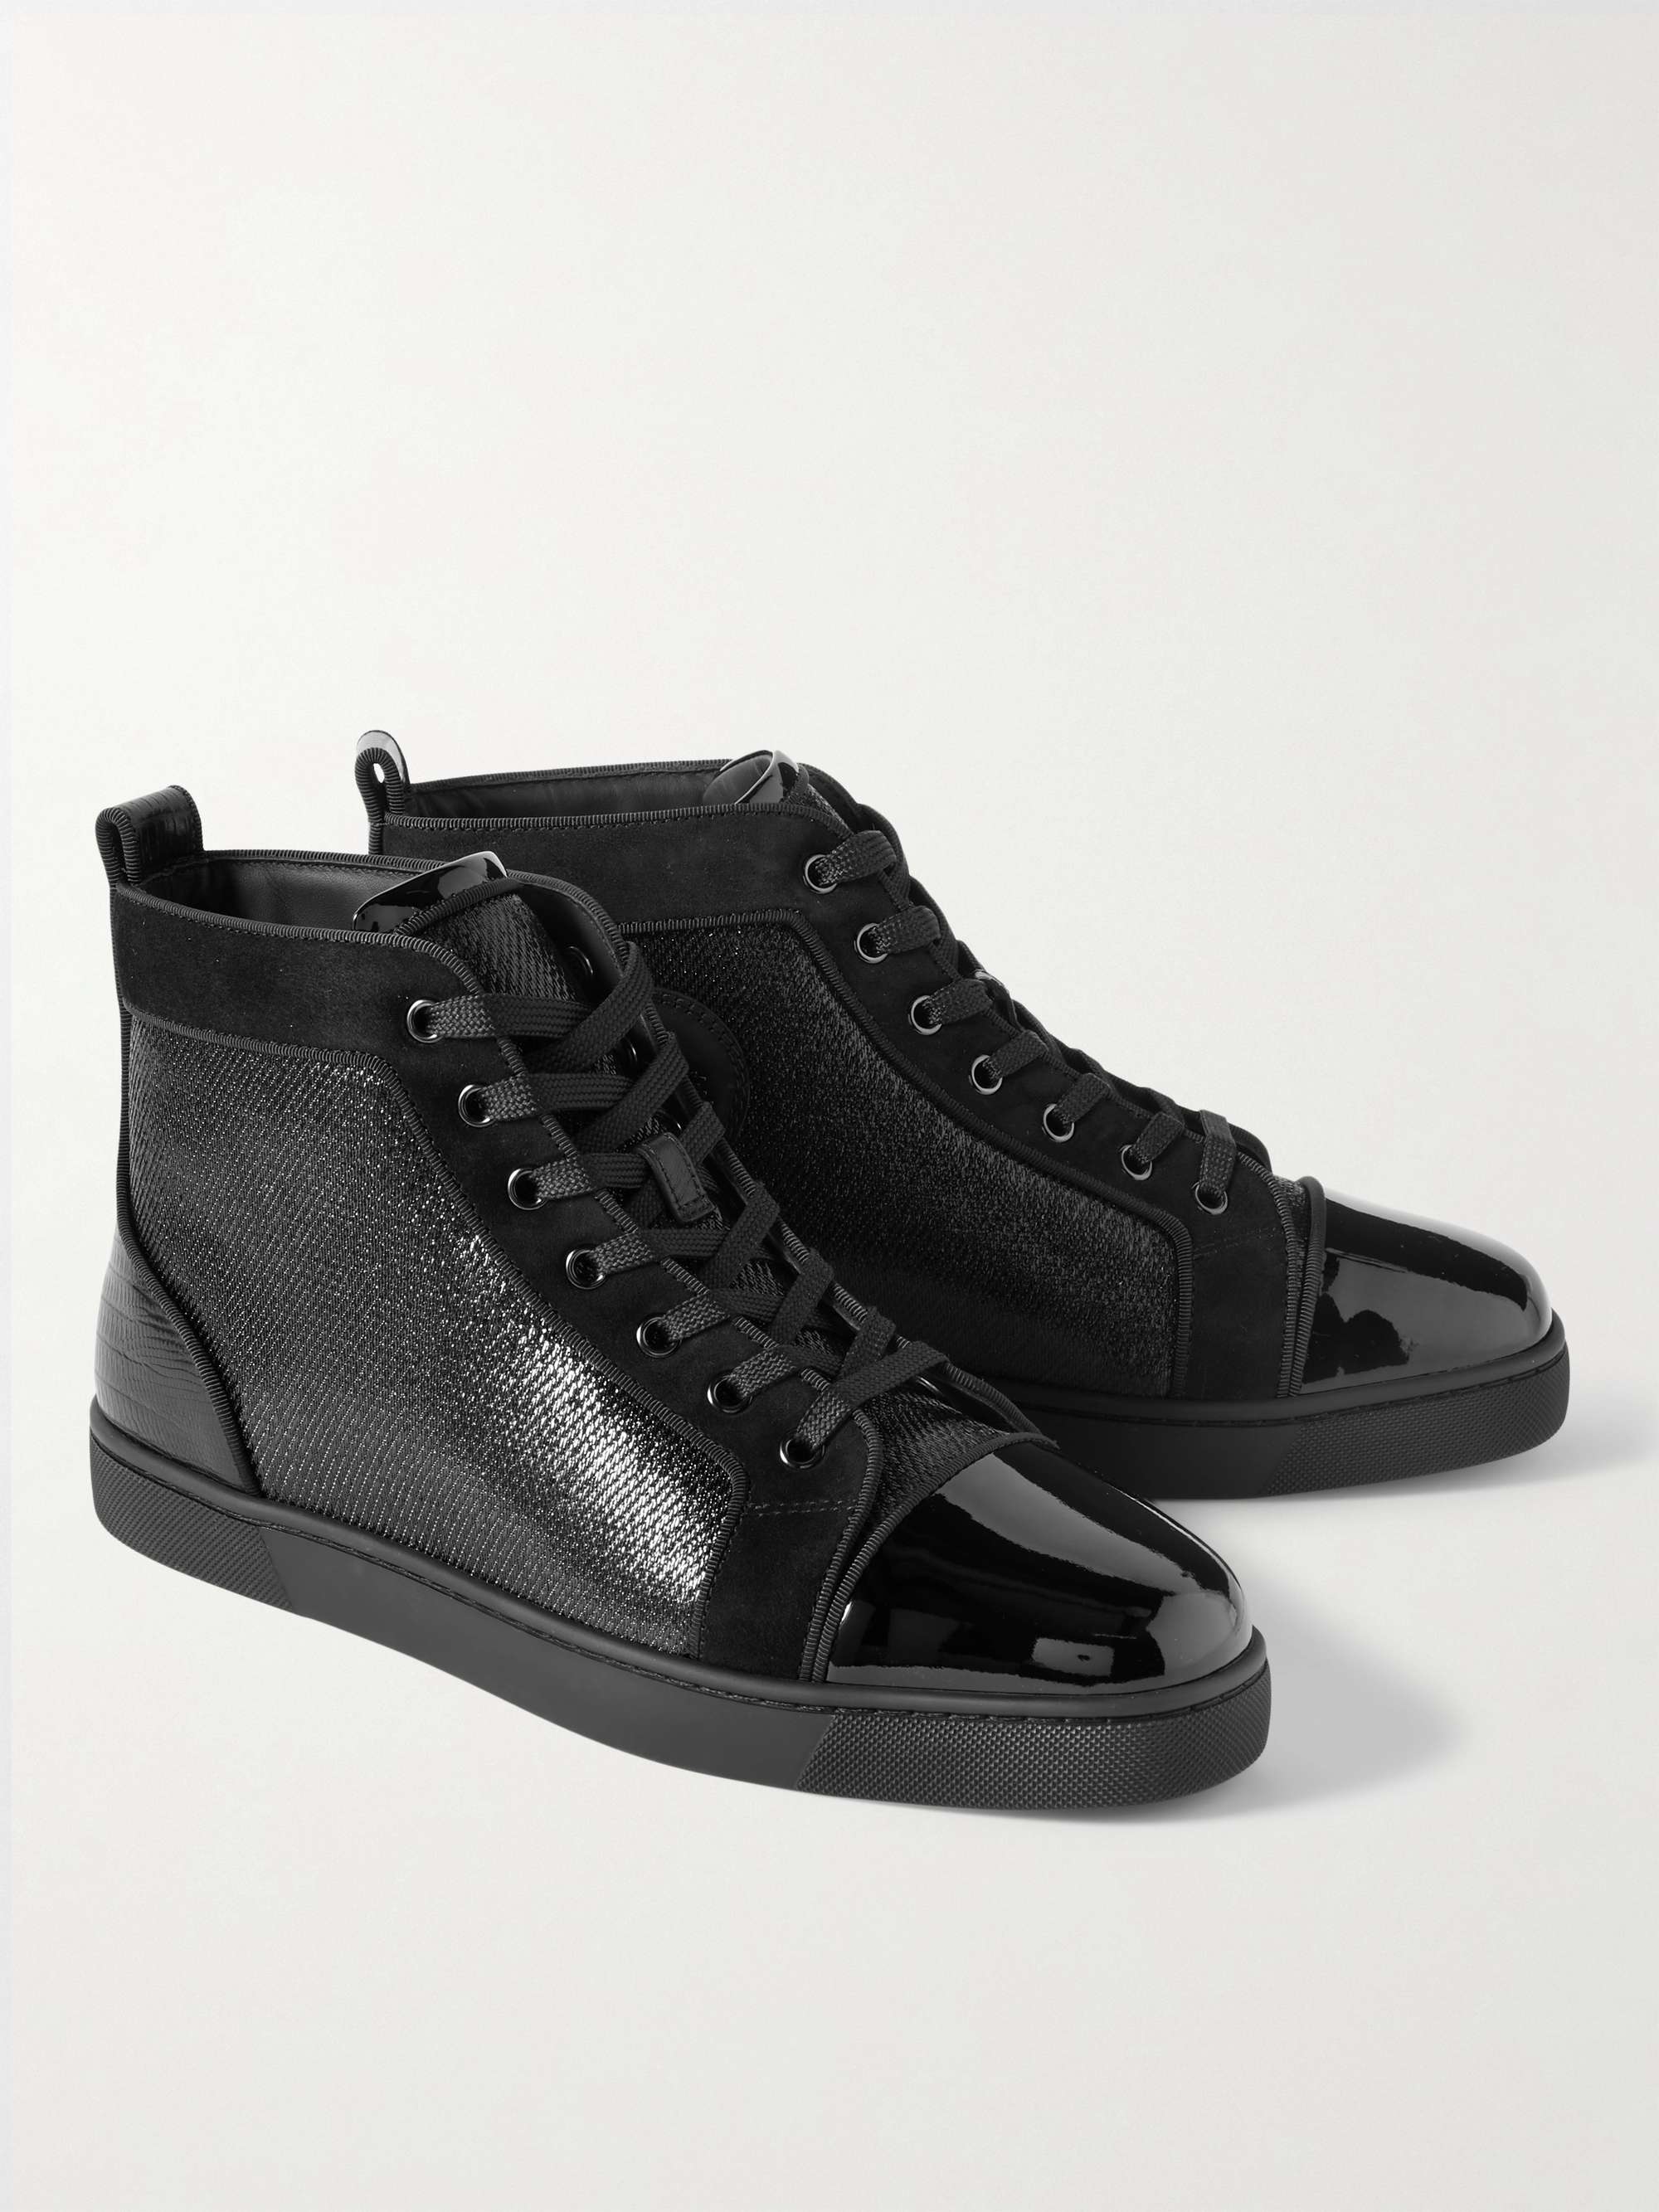 CHRISTIAN LOUBOUTIN Louis Orlato Logo-Appliquéd Felt-Trimmed Leather and Mesh High-Top Sneakers